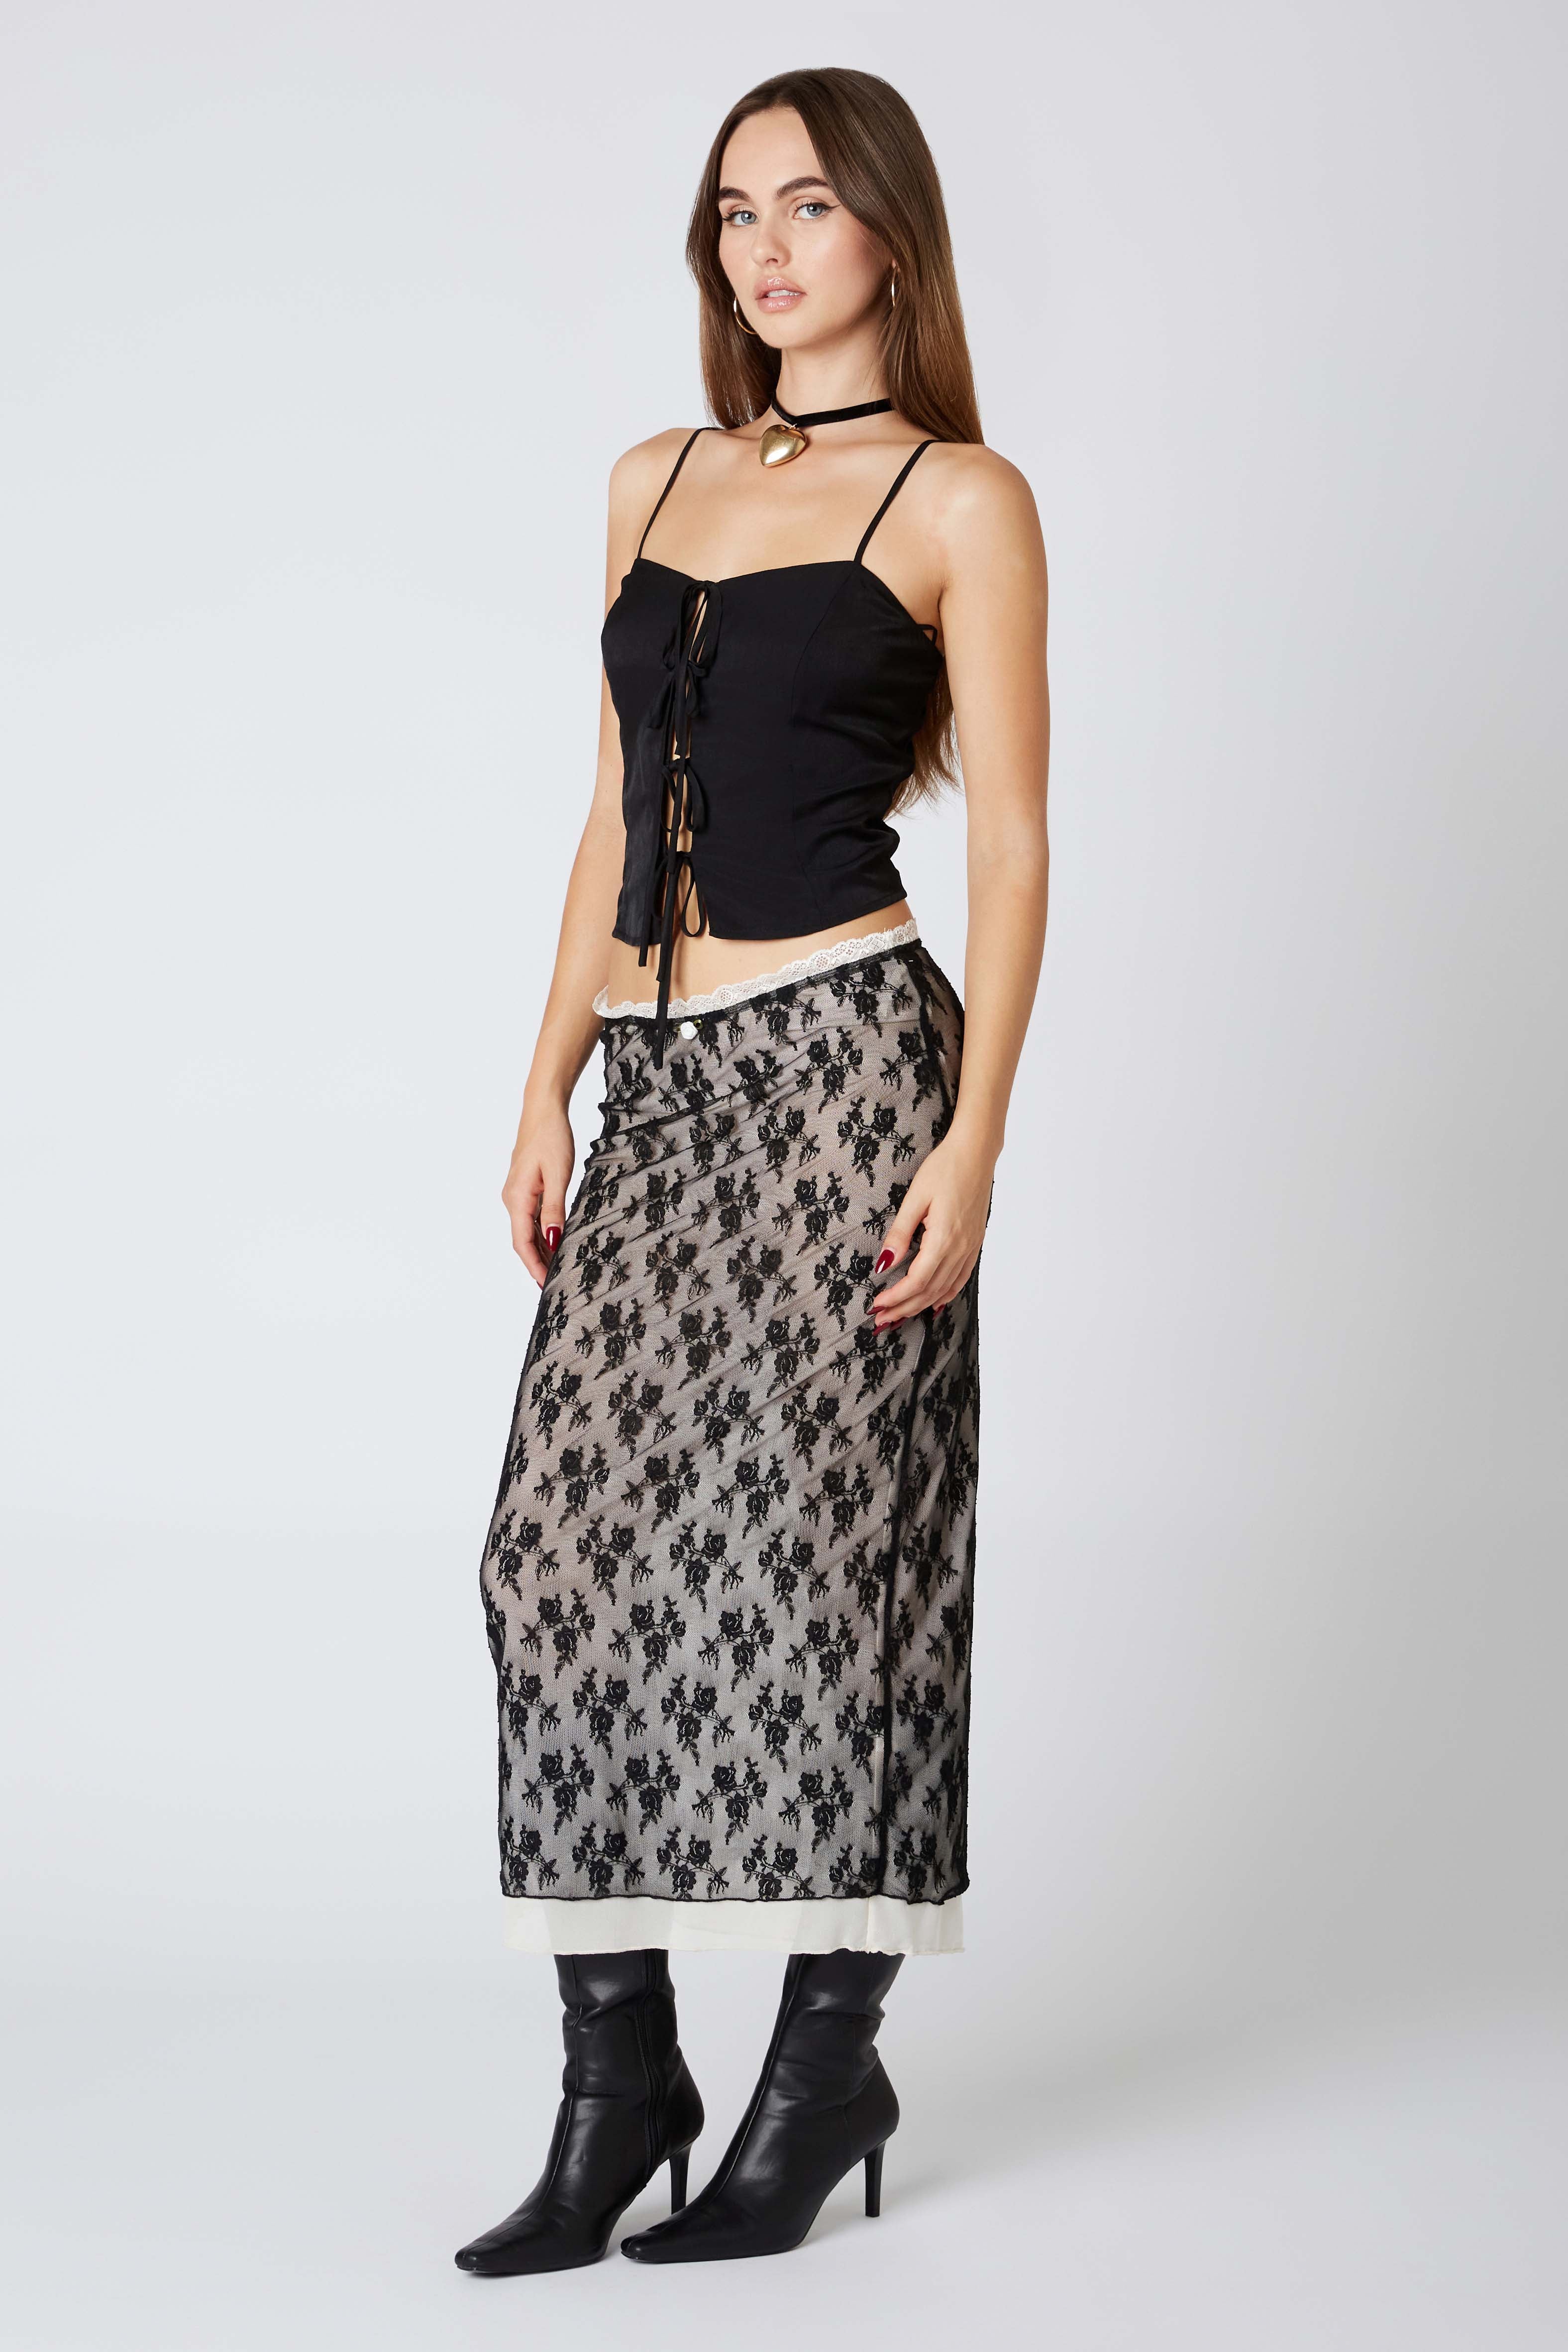 Lace Overlay Midi Skirt in Black Side View